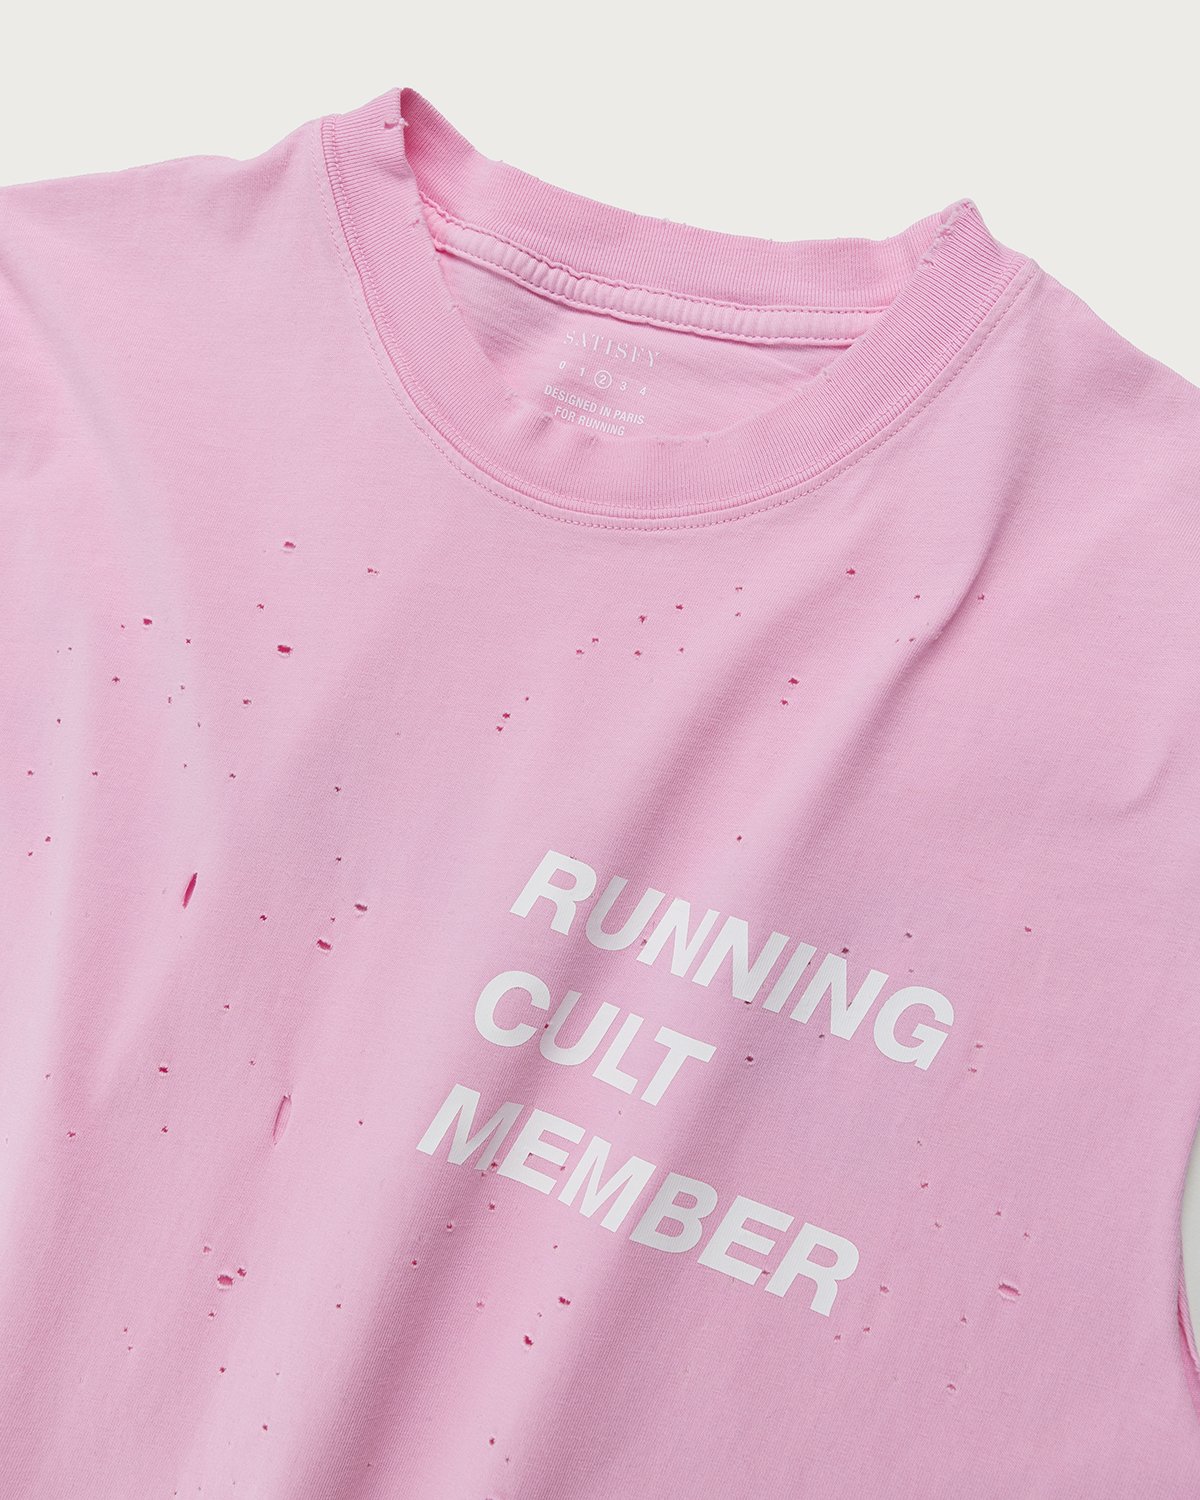 Satisfy x Highsnobiety - HS Sports Balance Muscle Tee Pink - Clothing - Pink - Image 4